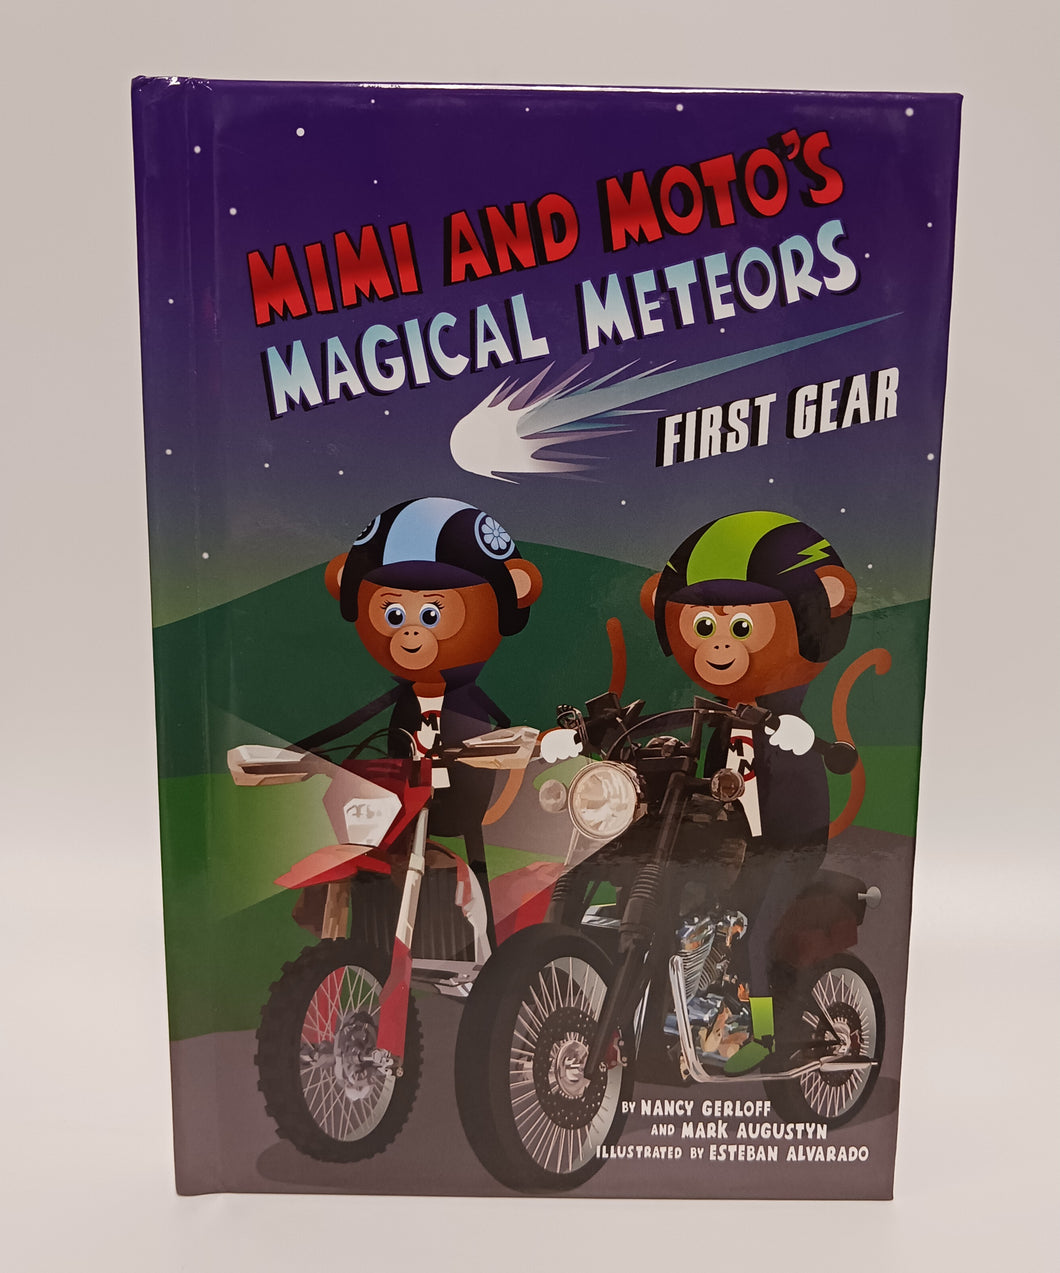 Mimi and Moto's Magical Meteors: First Gear